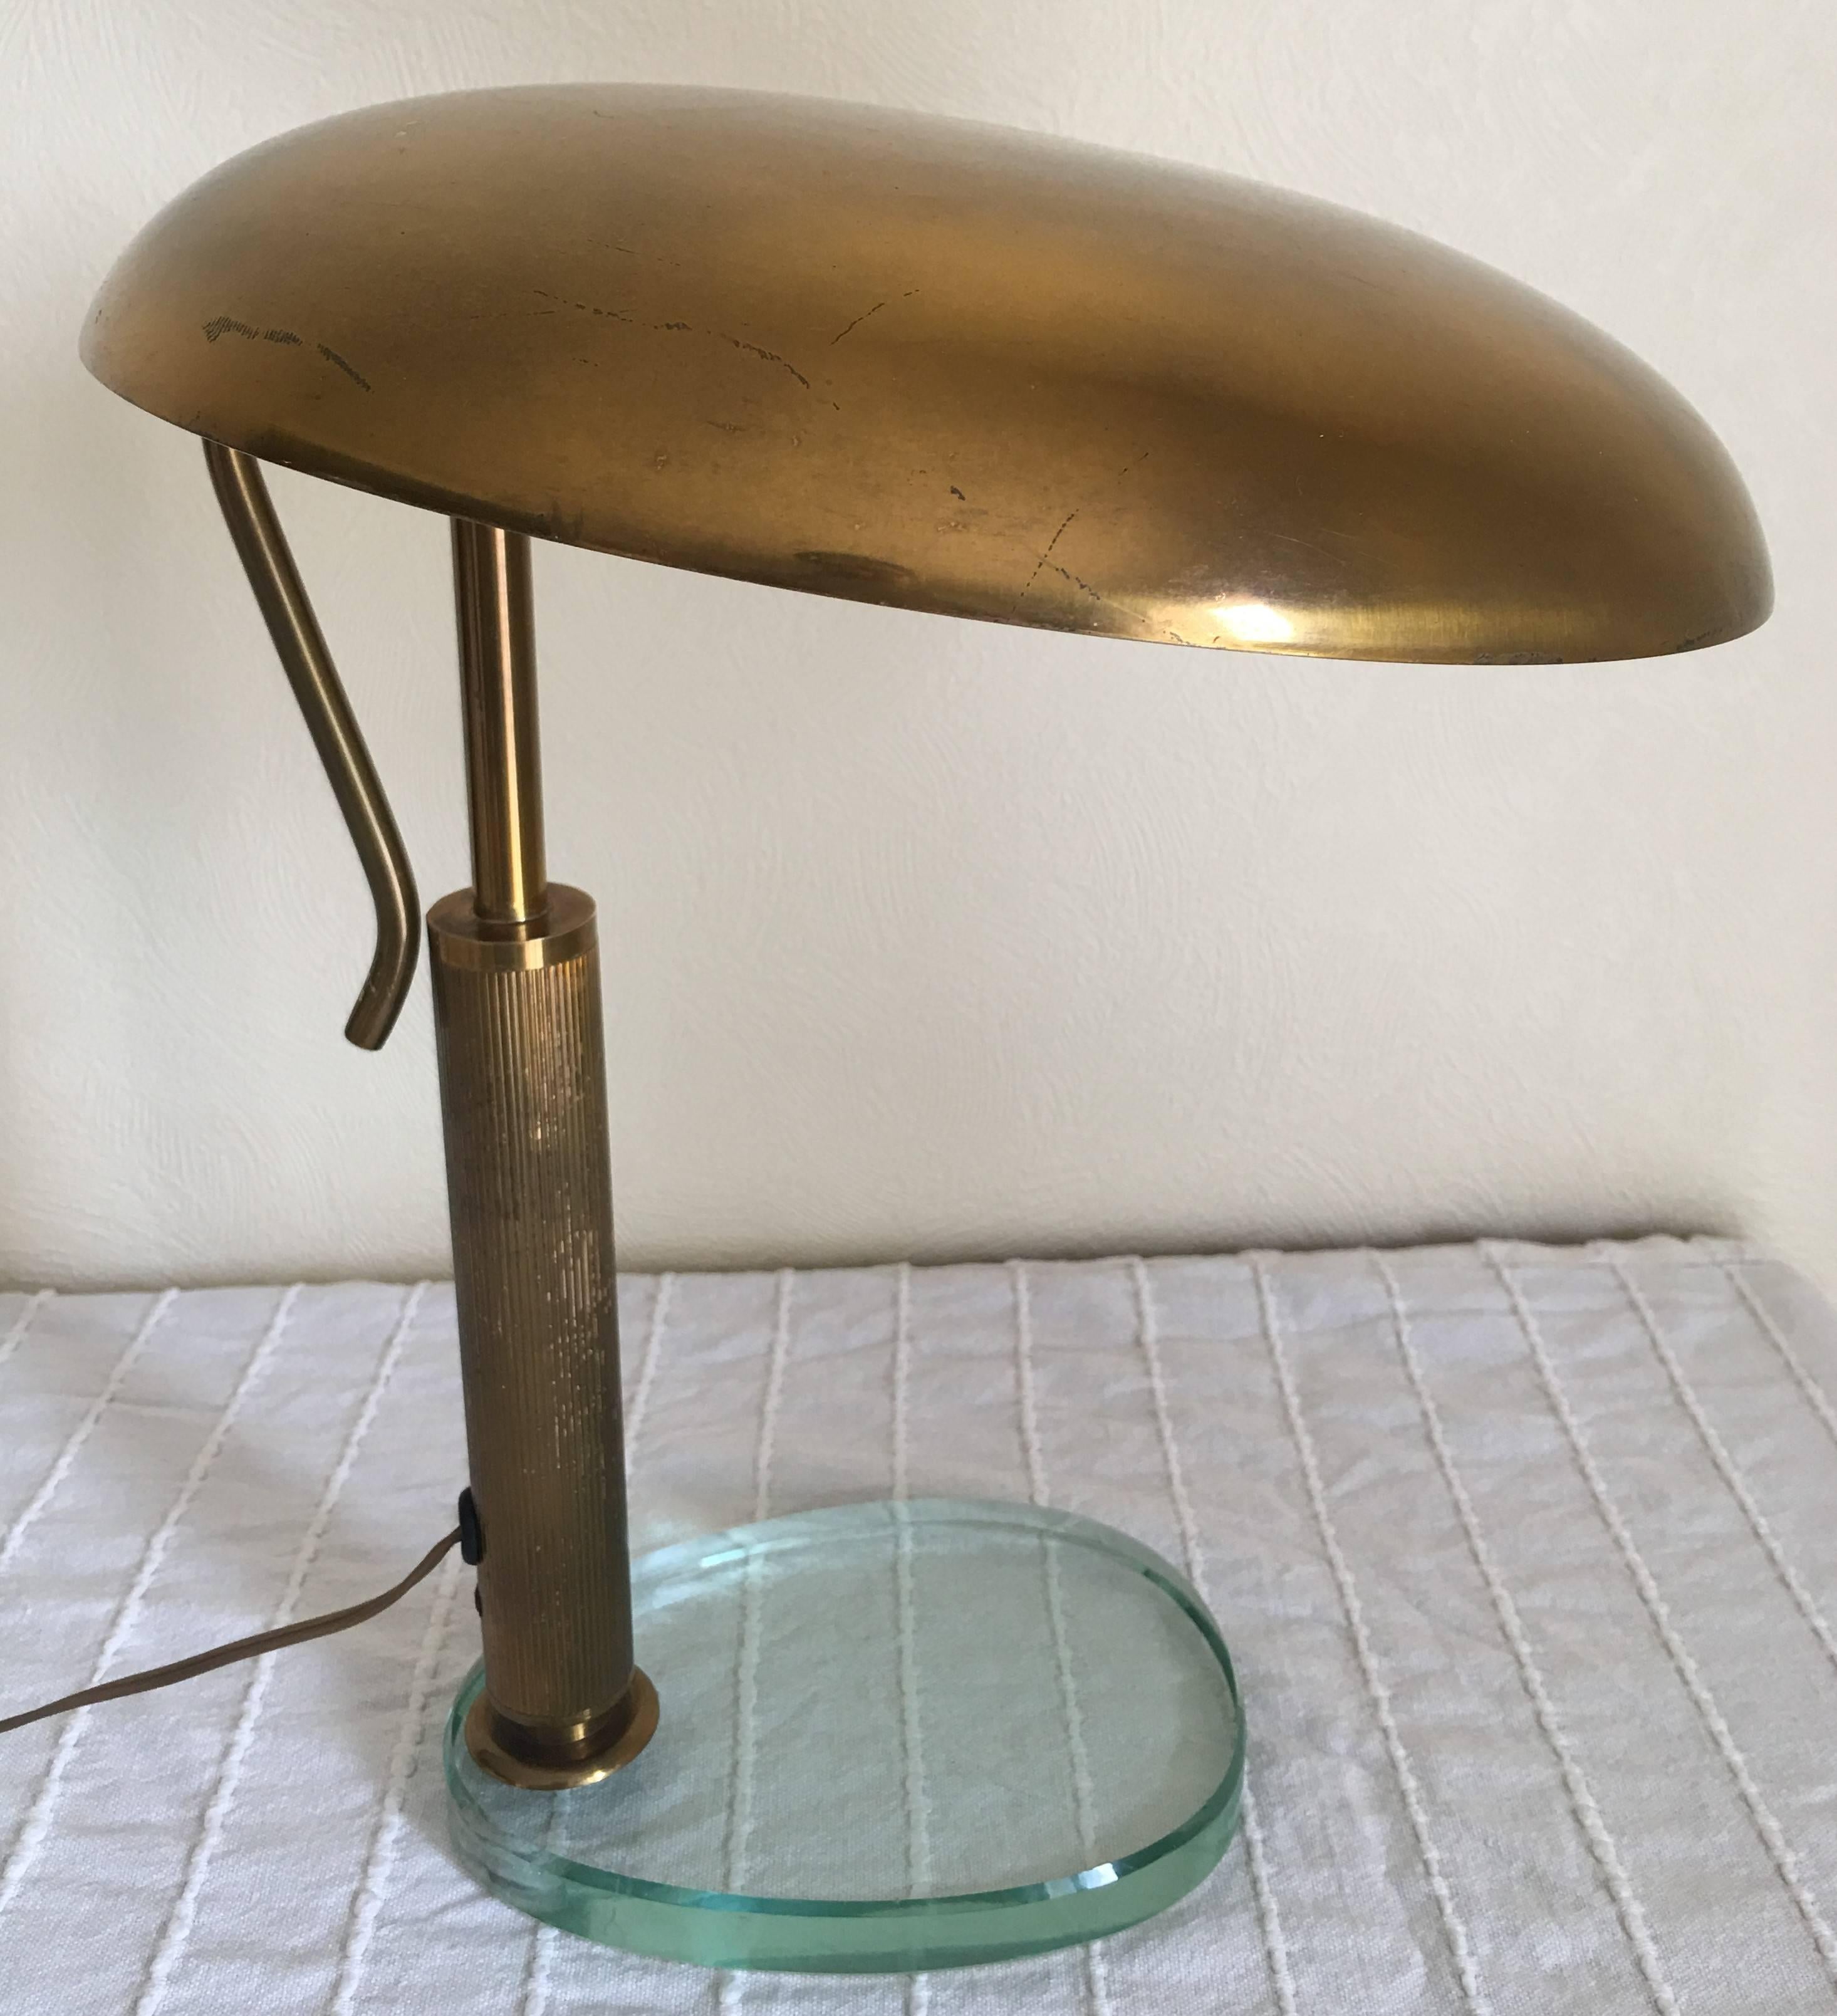 Elegant desk or table lamp produced by Fontana Arte in 1950s.
The fluted barrel and the glass base are characteristic elements of Fontana Arte's production.
The brass reflector is adjustable thanks to the long handle at the backside
Very beautiful